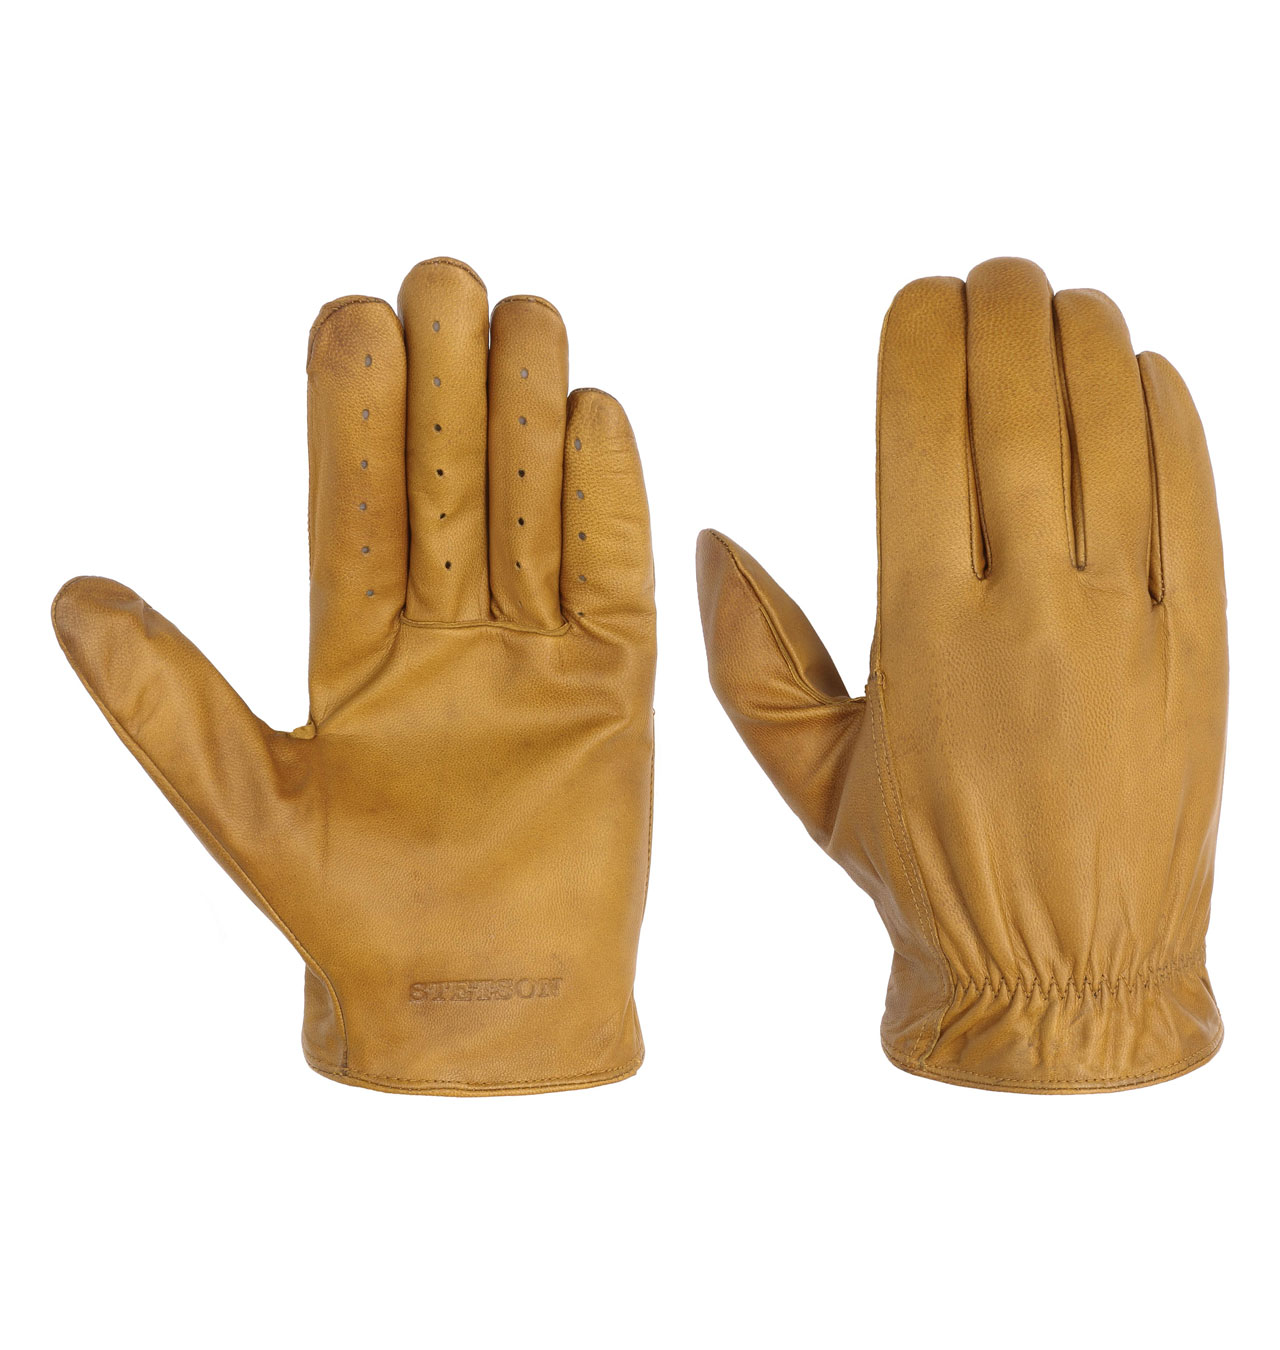 Stetson - Goat-Nappa Leather Gloves - Cognac